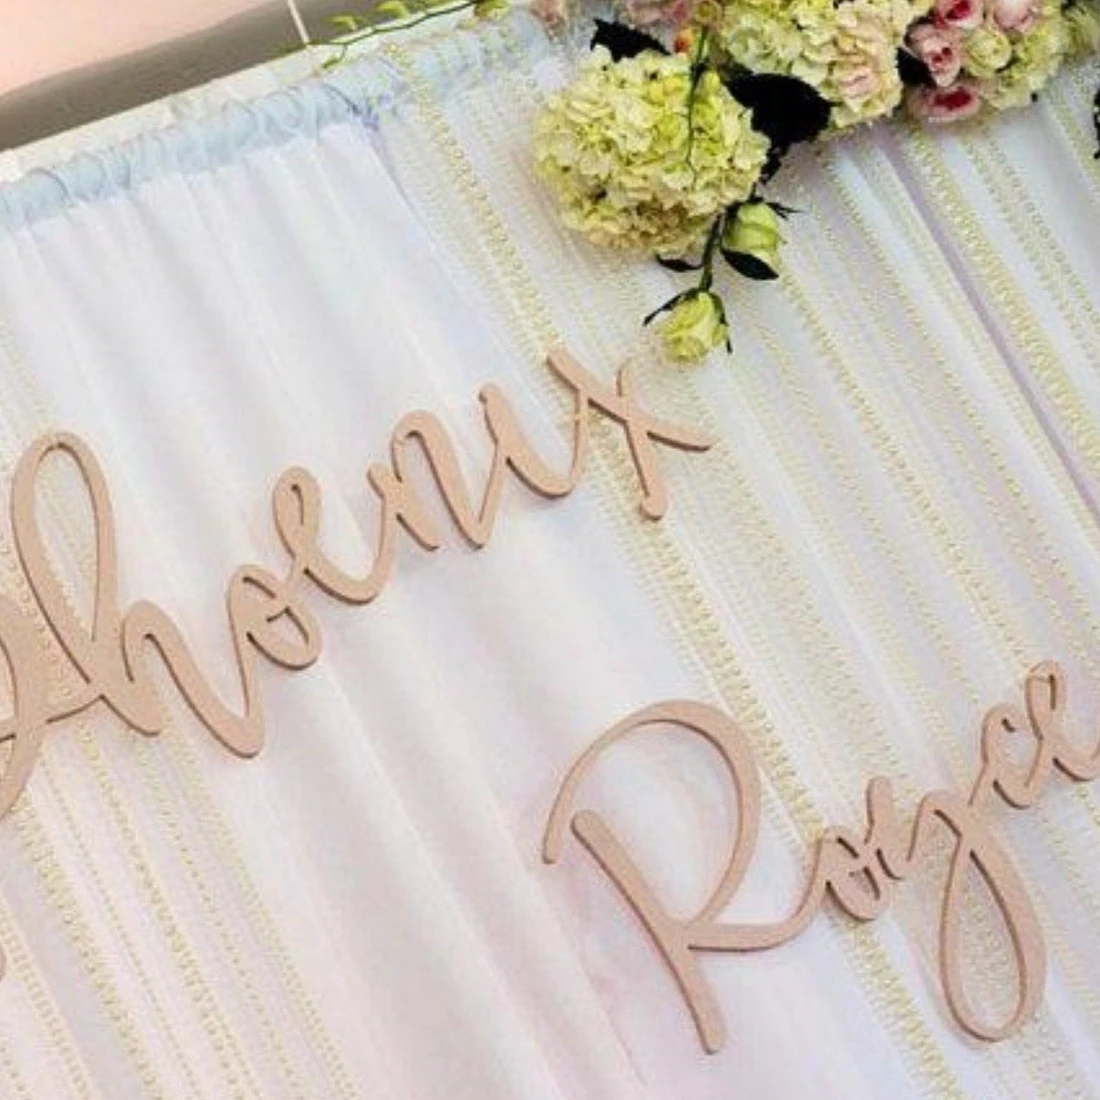 We've been creating script letters for baby shower themes since 2014.